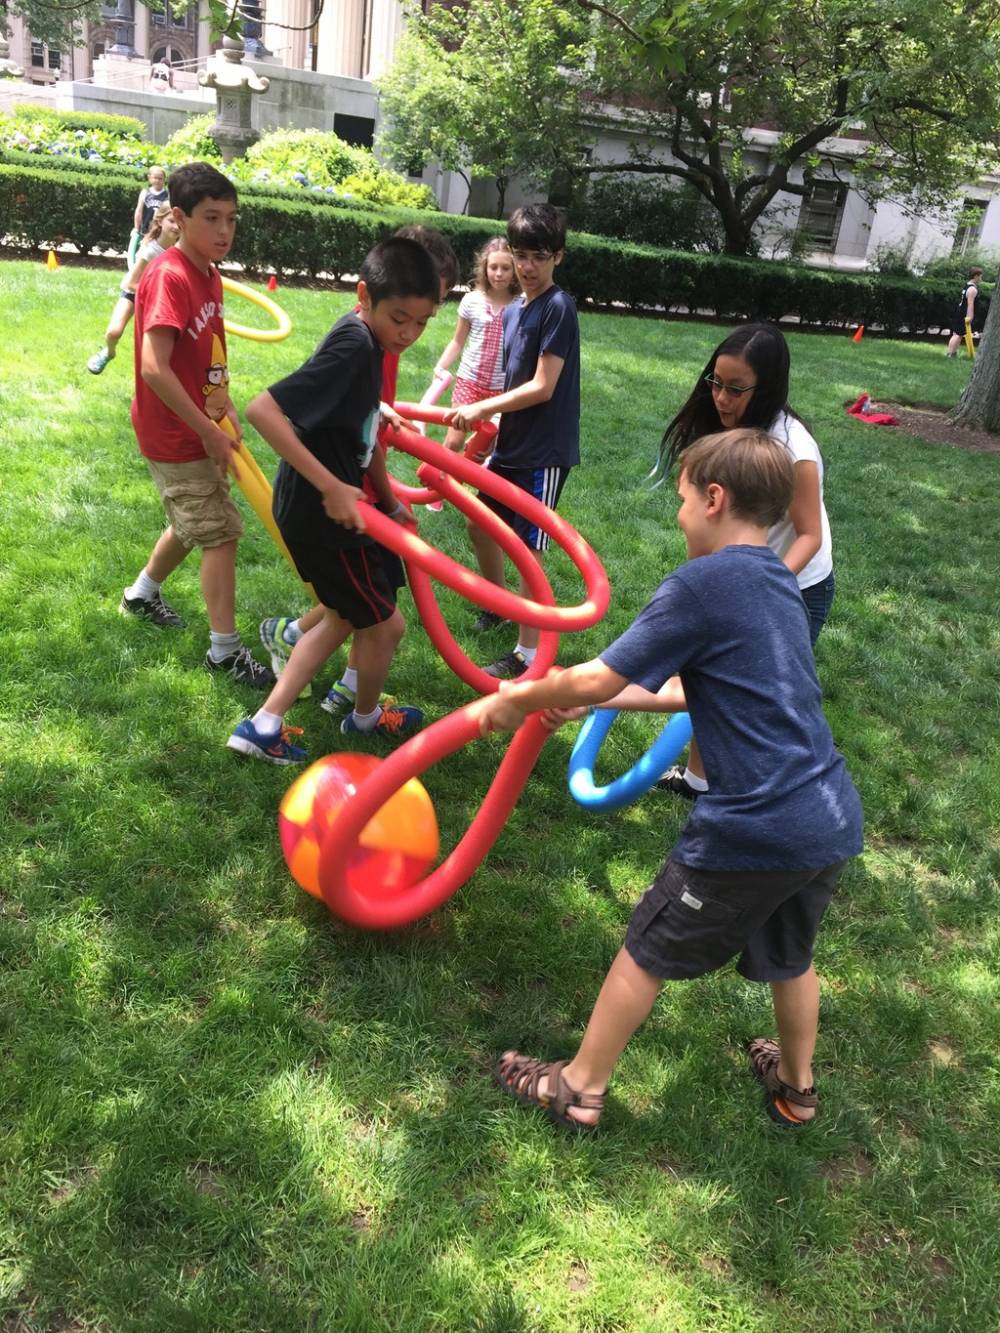 TOP NEW YORK SWIM CAMP: Columbia University - Little Lions Camp is a Top Swim Summer Camp located in New York New York offering many fun and enriching Swim and other camp programs. 